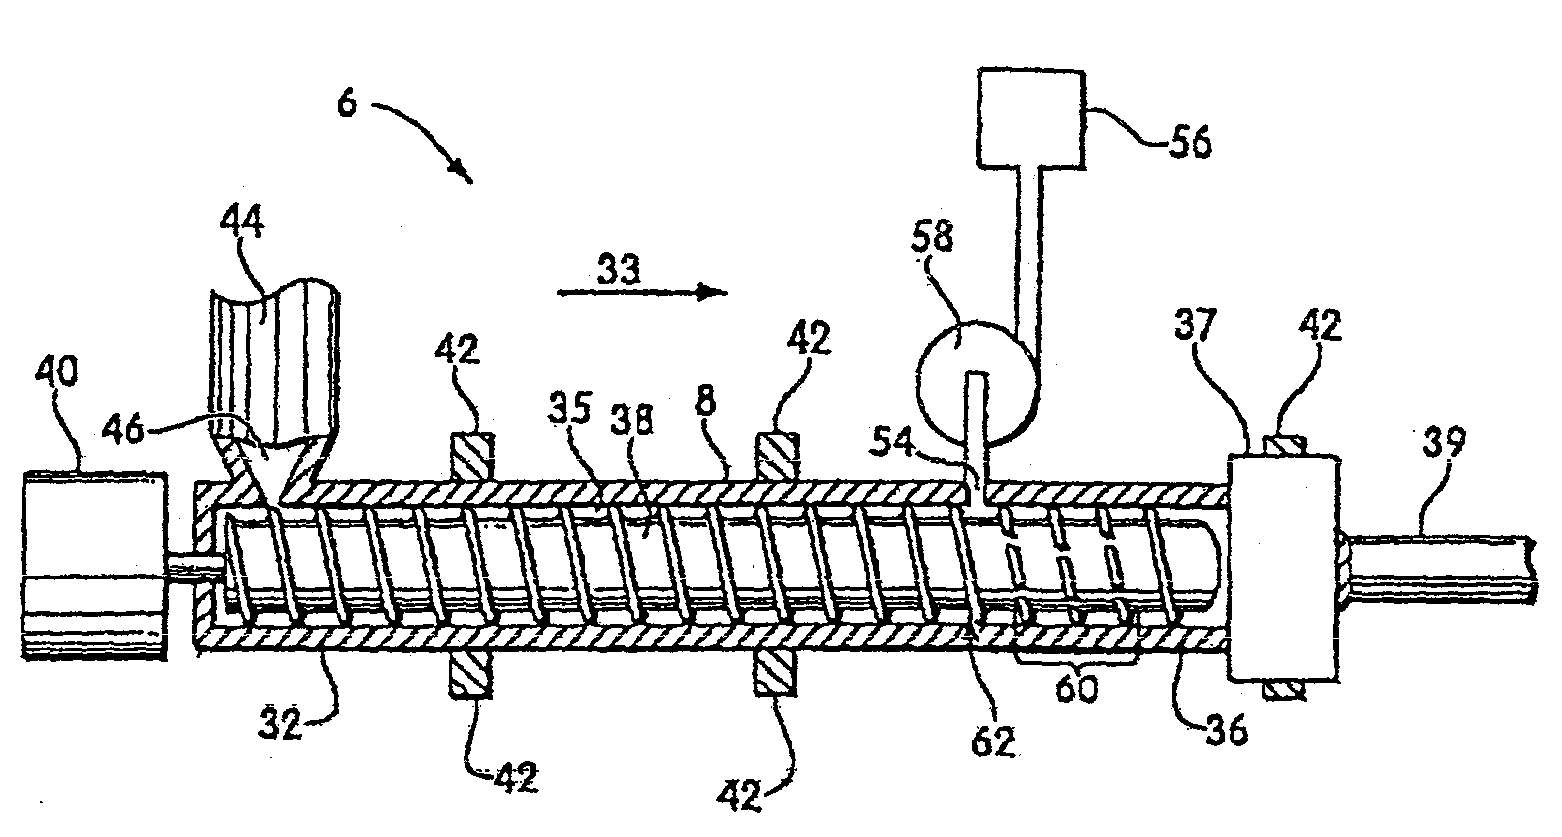 Thermoplastic elastomeric foam materials and methods of forming the same